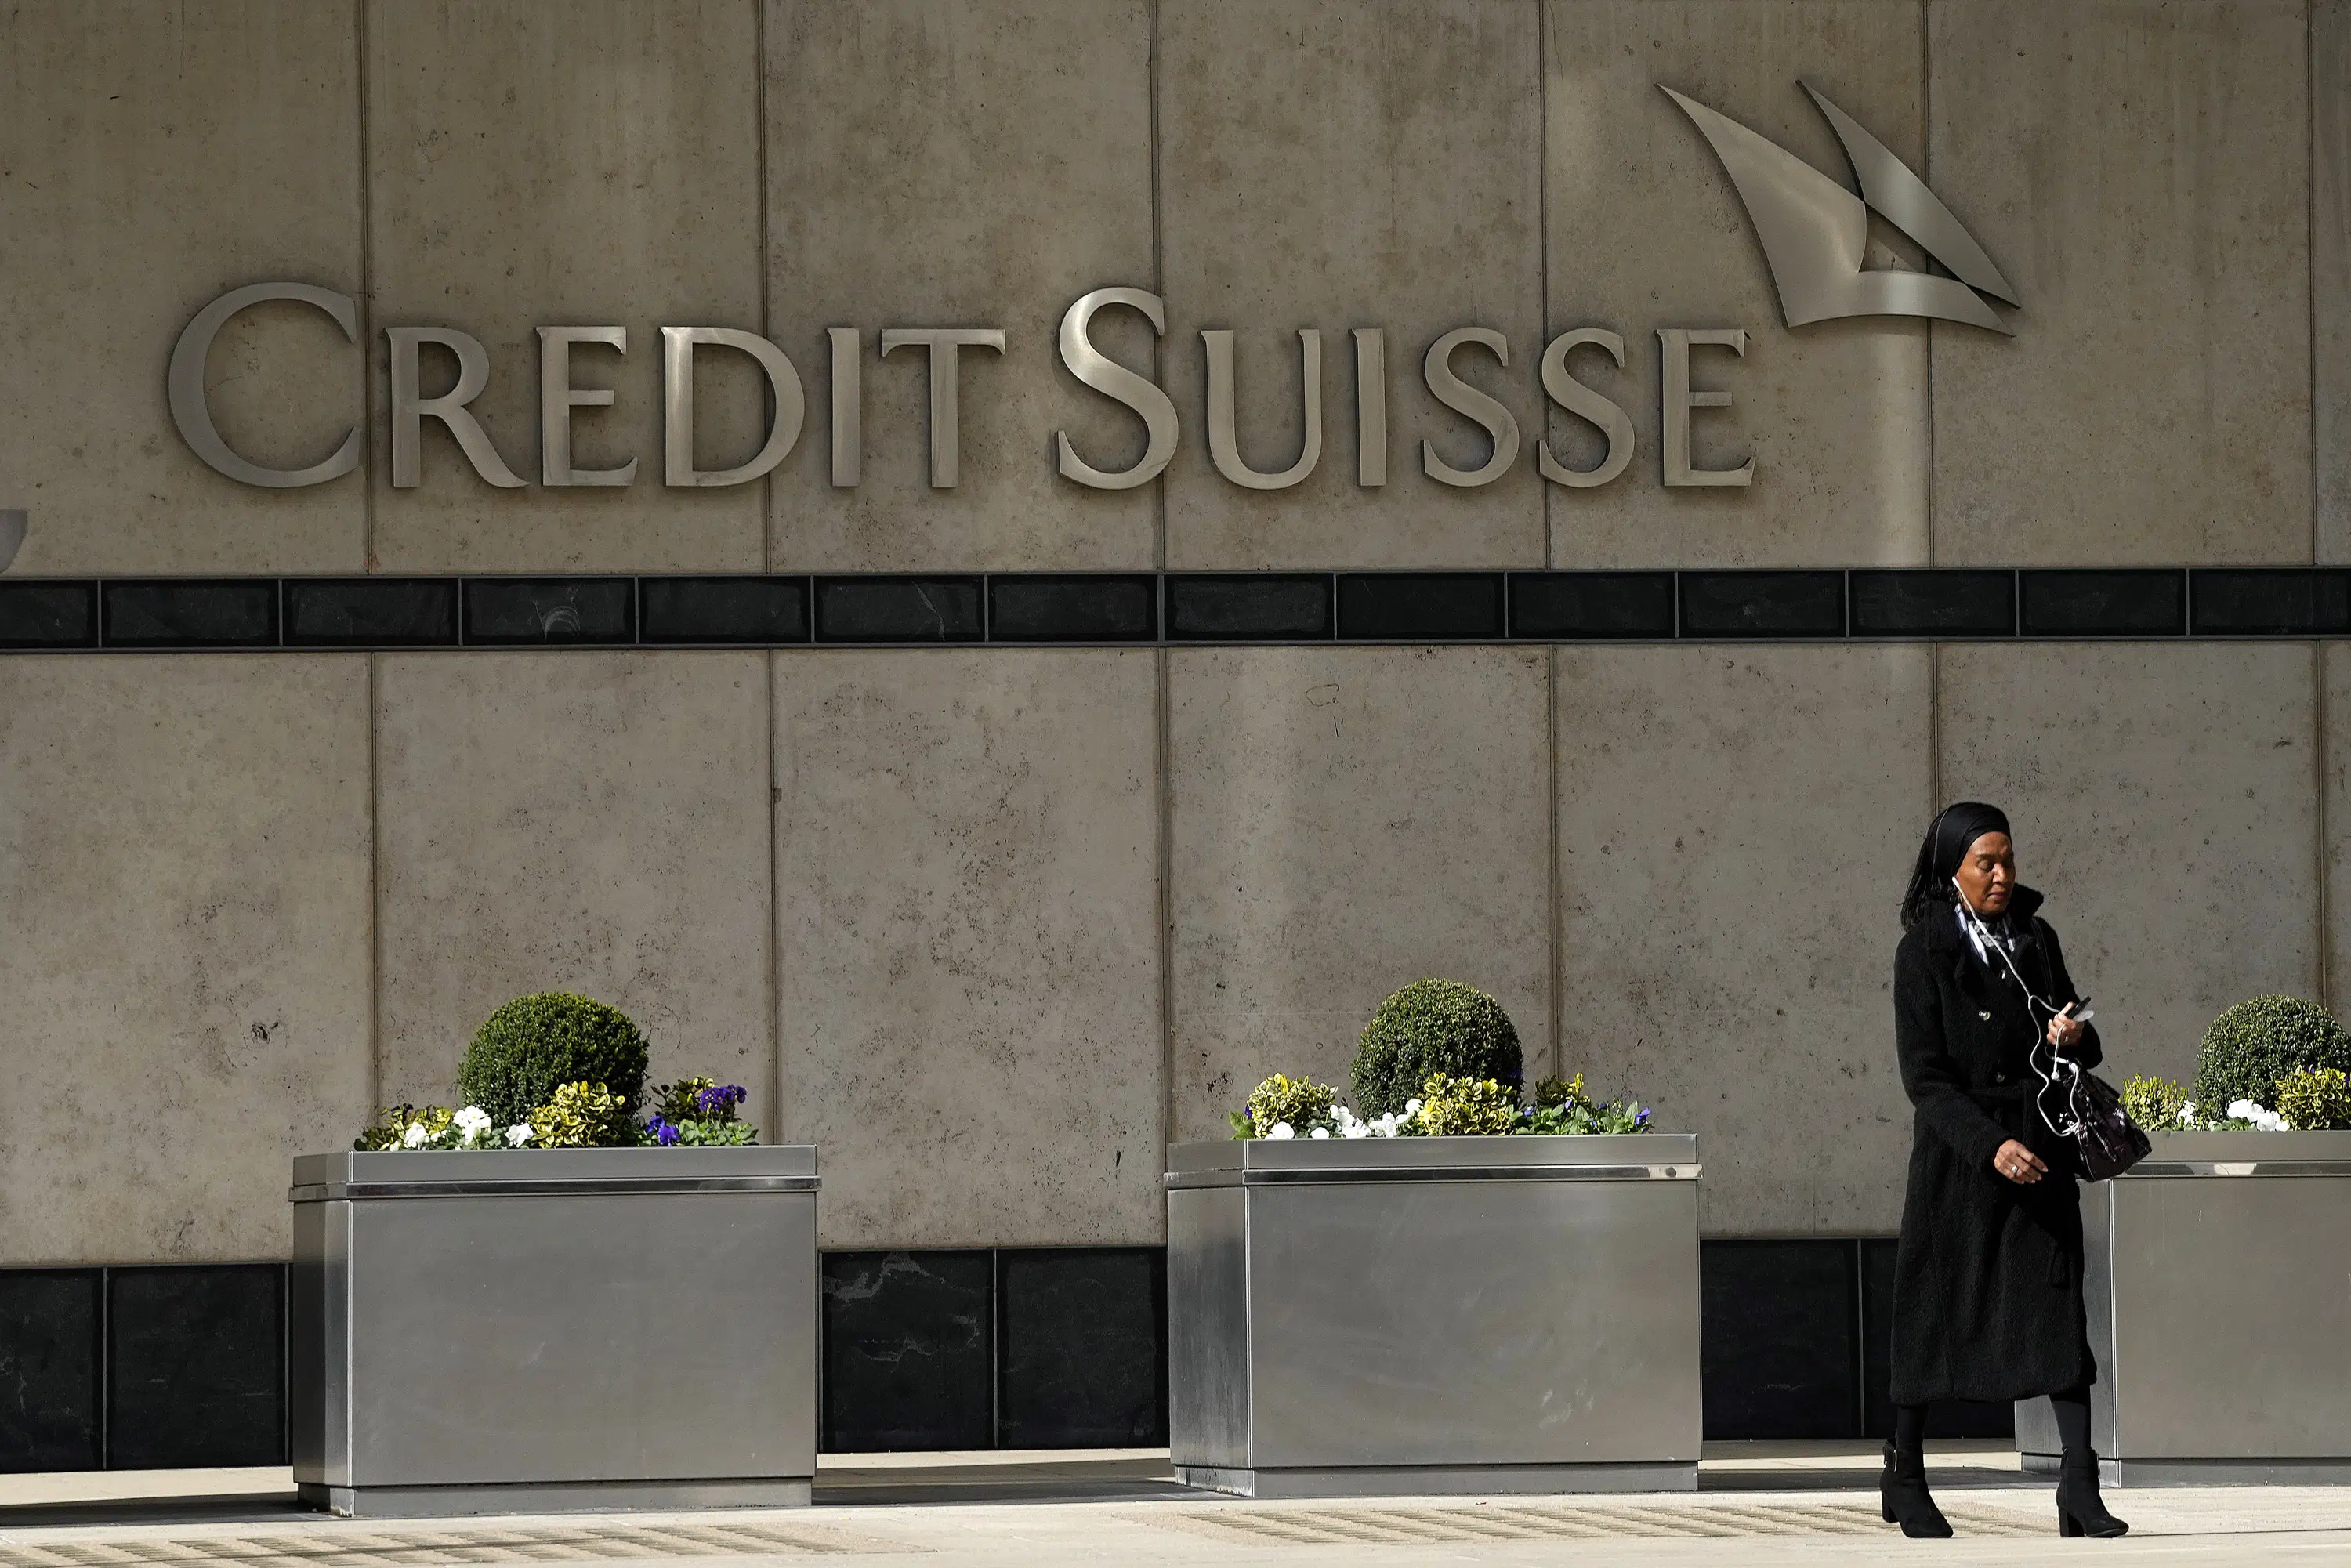 Credit Suisse shares rose after the central bank provided a lifeline